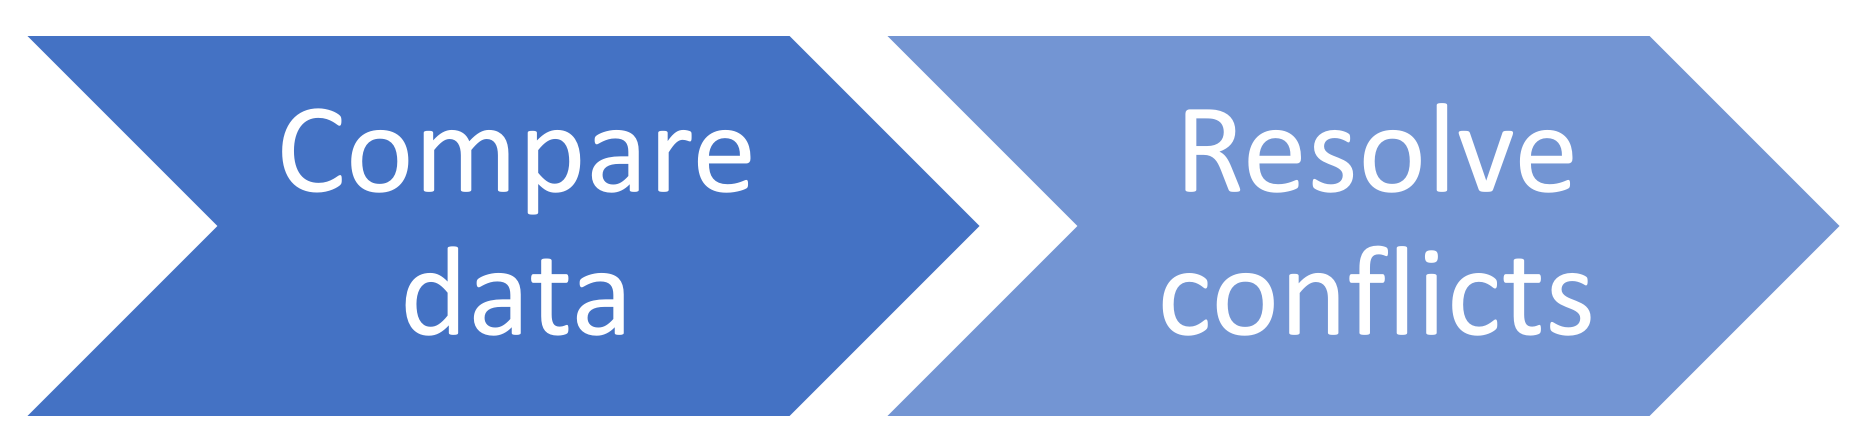 A process flow displays as two blue arrows with white text. The text on the first arrow states: Compare data. The text on the second arrow states: resolve conflicts. The blue of the second arrow is lighter than the blue of the first arrow.